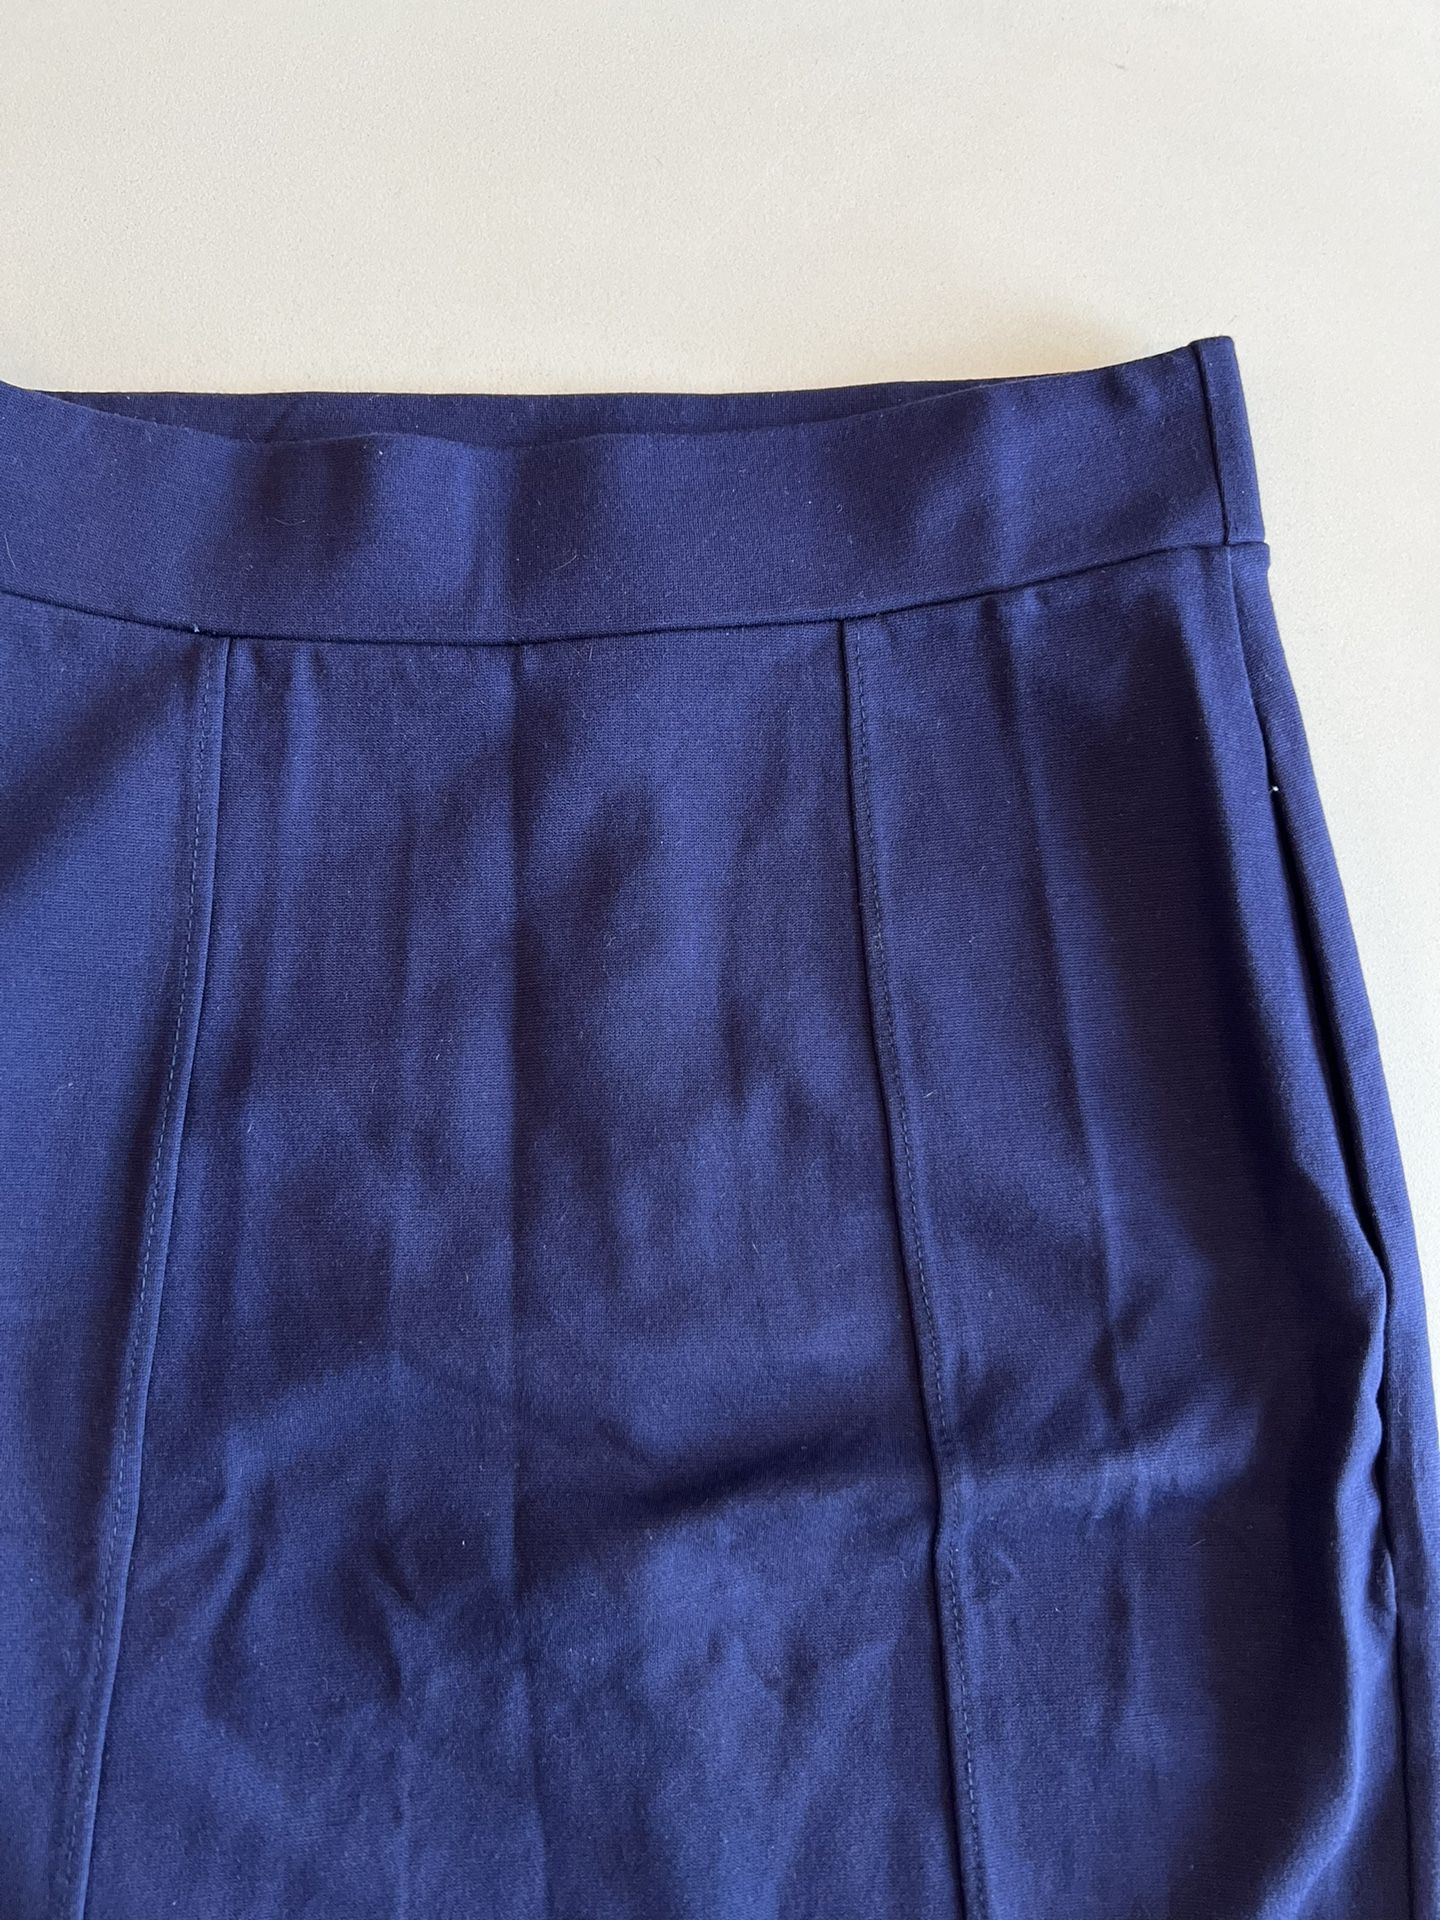 Navy blue pencil skirt - size small 